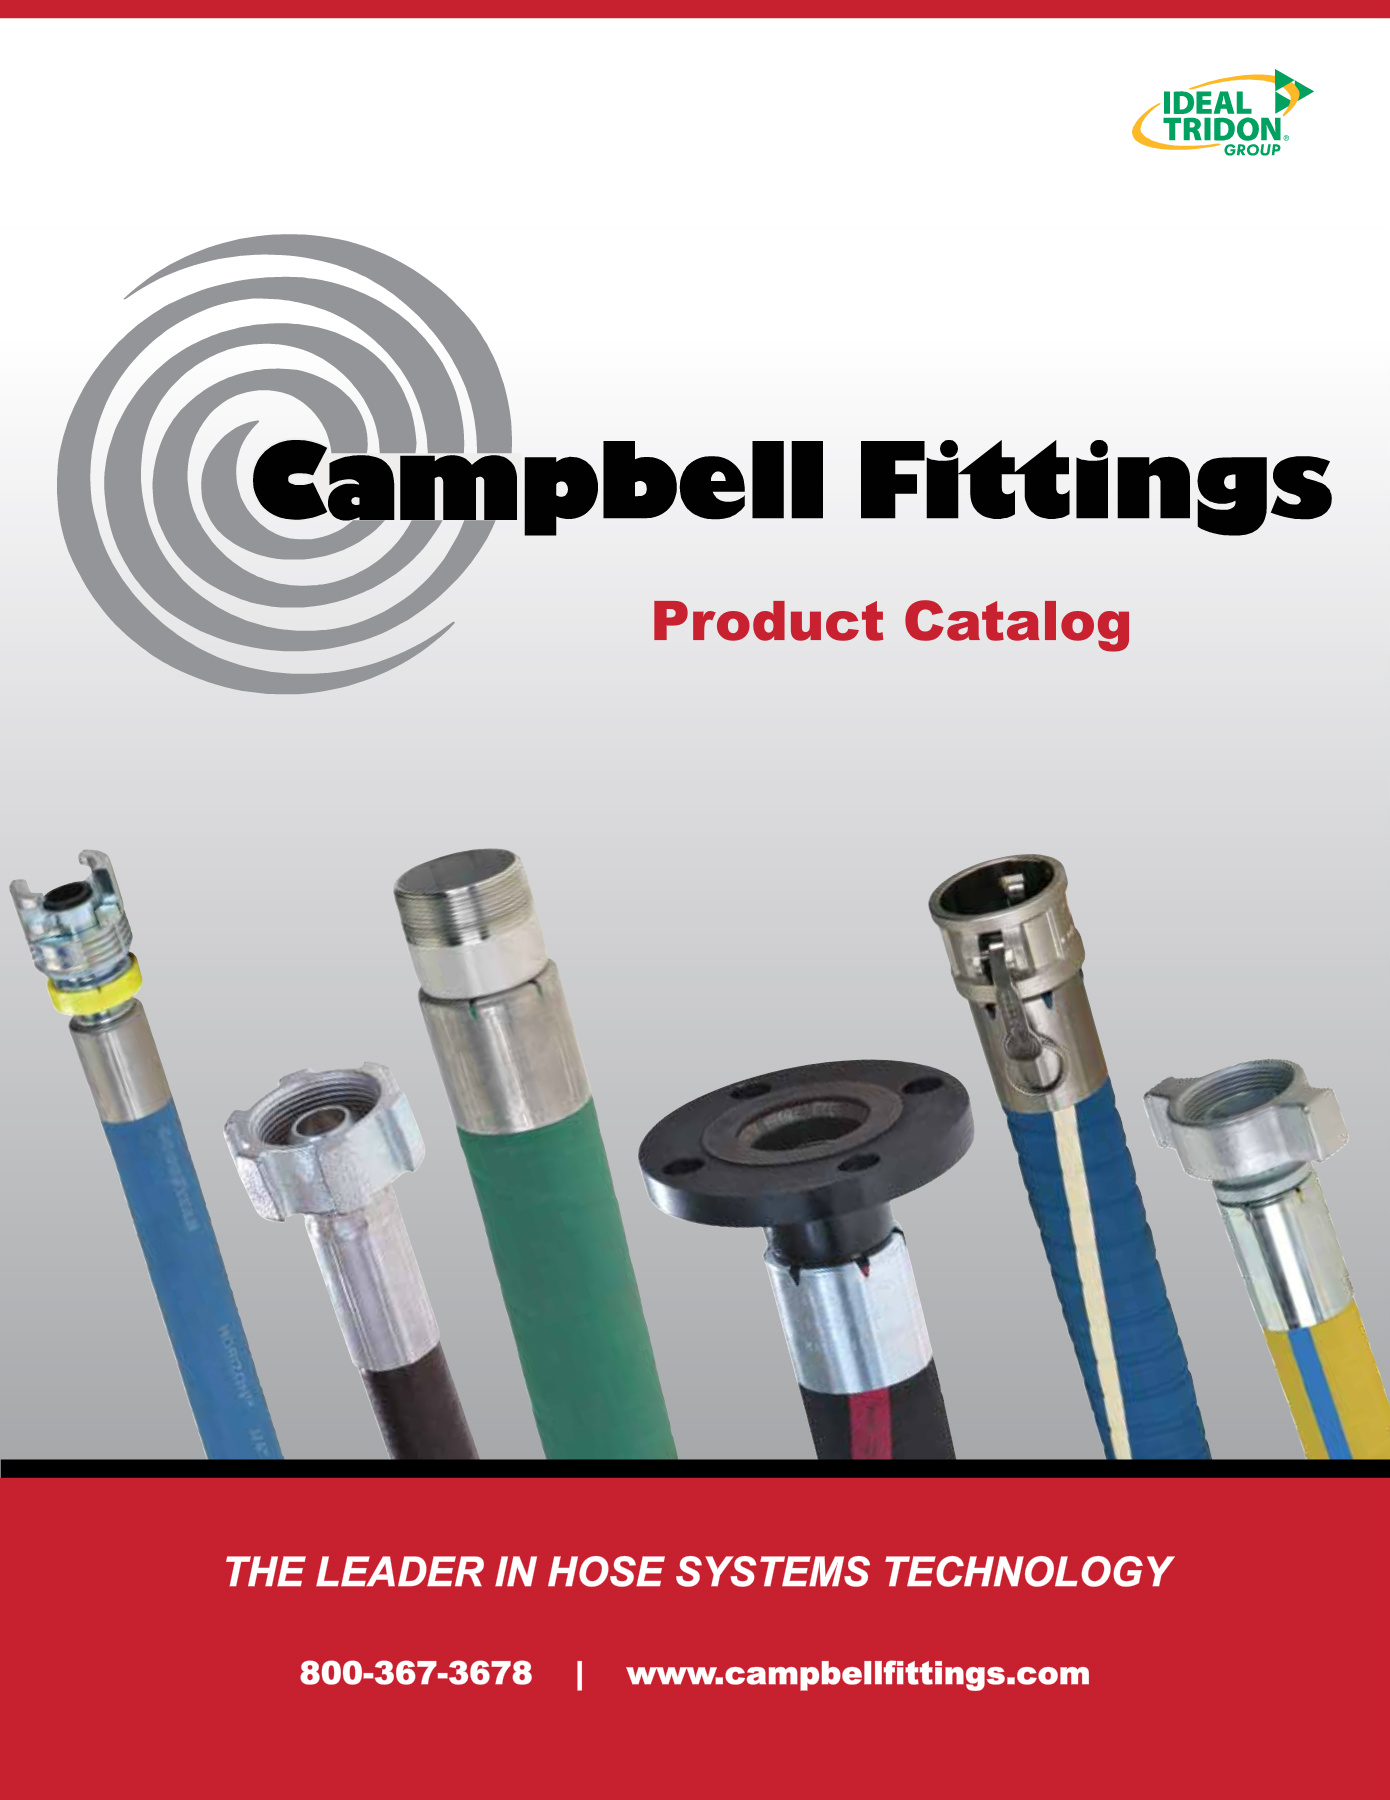 Campbell Fittings SSS150212 304 Sleeve 1-1/2 2-3/8 2-12/64 3 ID Stainless Steel 1-1/2 2-3/8 2-12/64 3 ID 